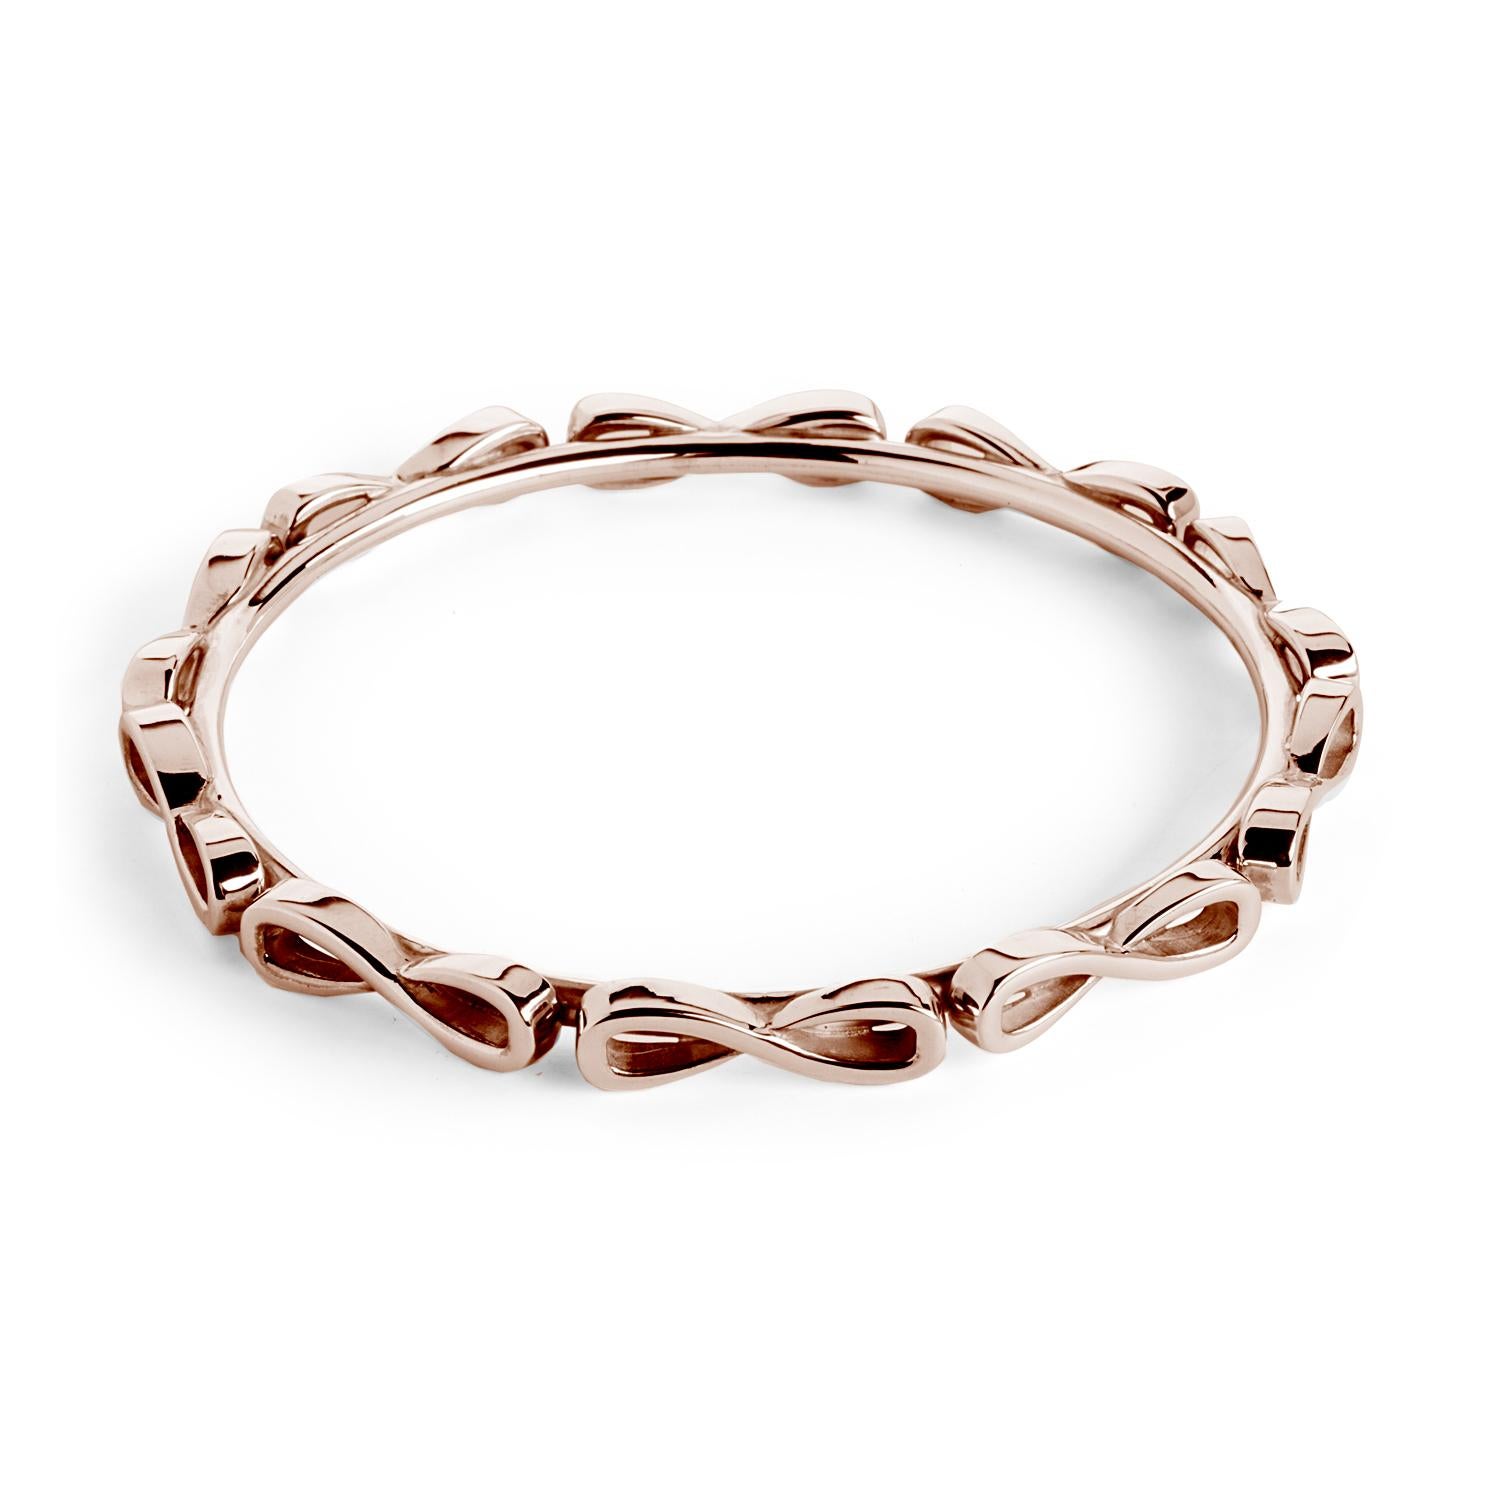 Designed in NYC

.925 Sterling Silver Infinity Wraparound Bangle Bracelet. When it comes to self-expression, the style possibilities are endless. Infinity wraparound bangle bracelet:

.925 Sterling Silver bangle and infinities
High-polish